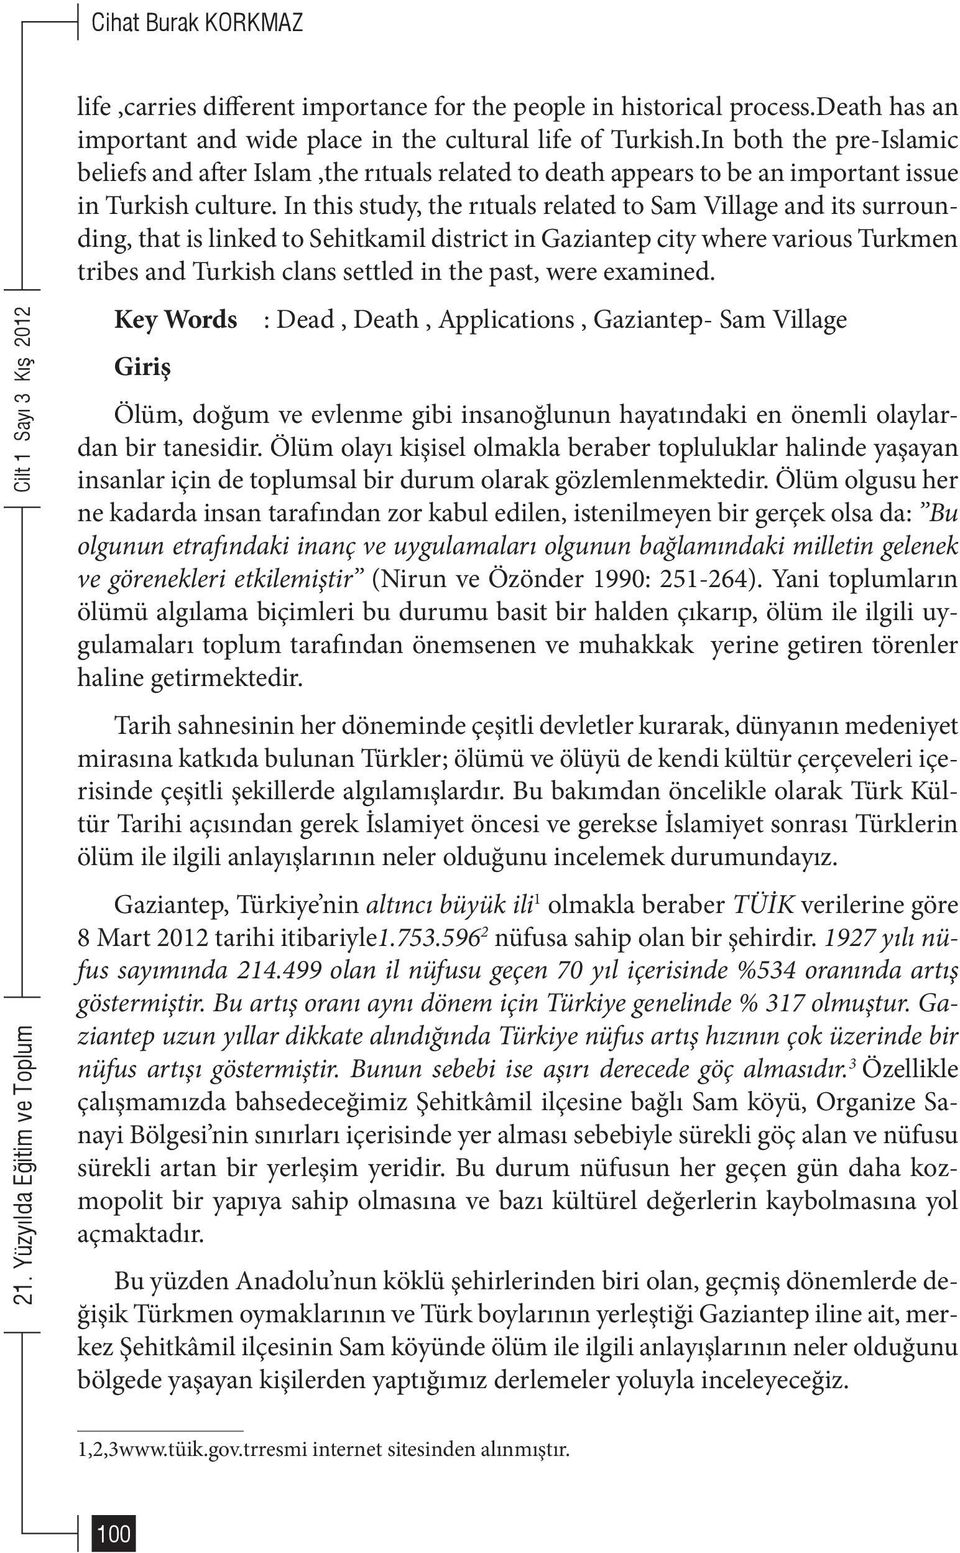 In this study, the rıtuals related to Sam Village and its surrounding, that is linked to Sehitkamil district in Gaziantep city where various Turkmen tribes and Turkish clans settled in the past, were